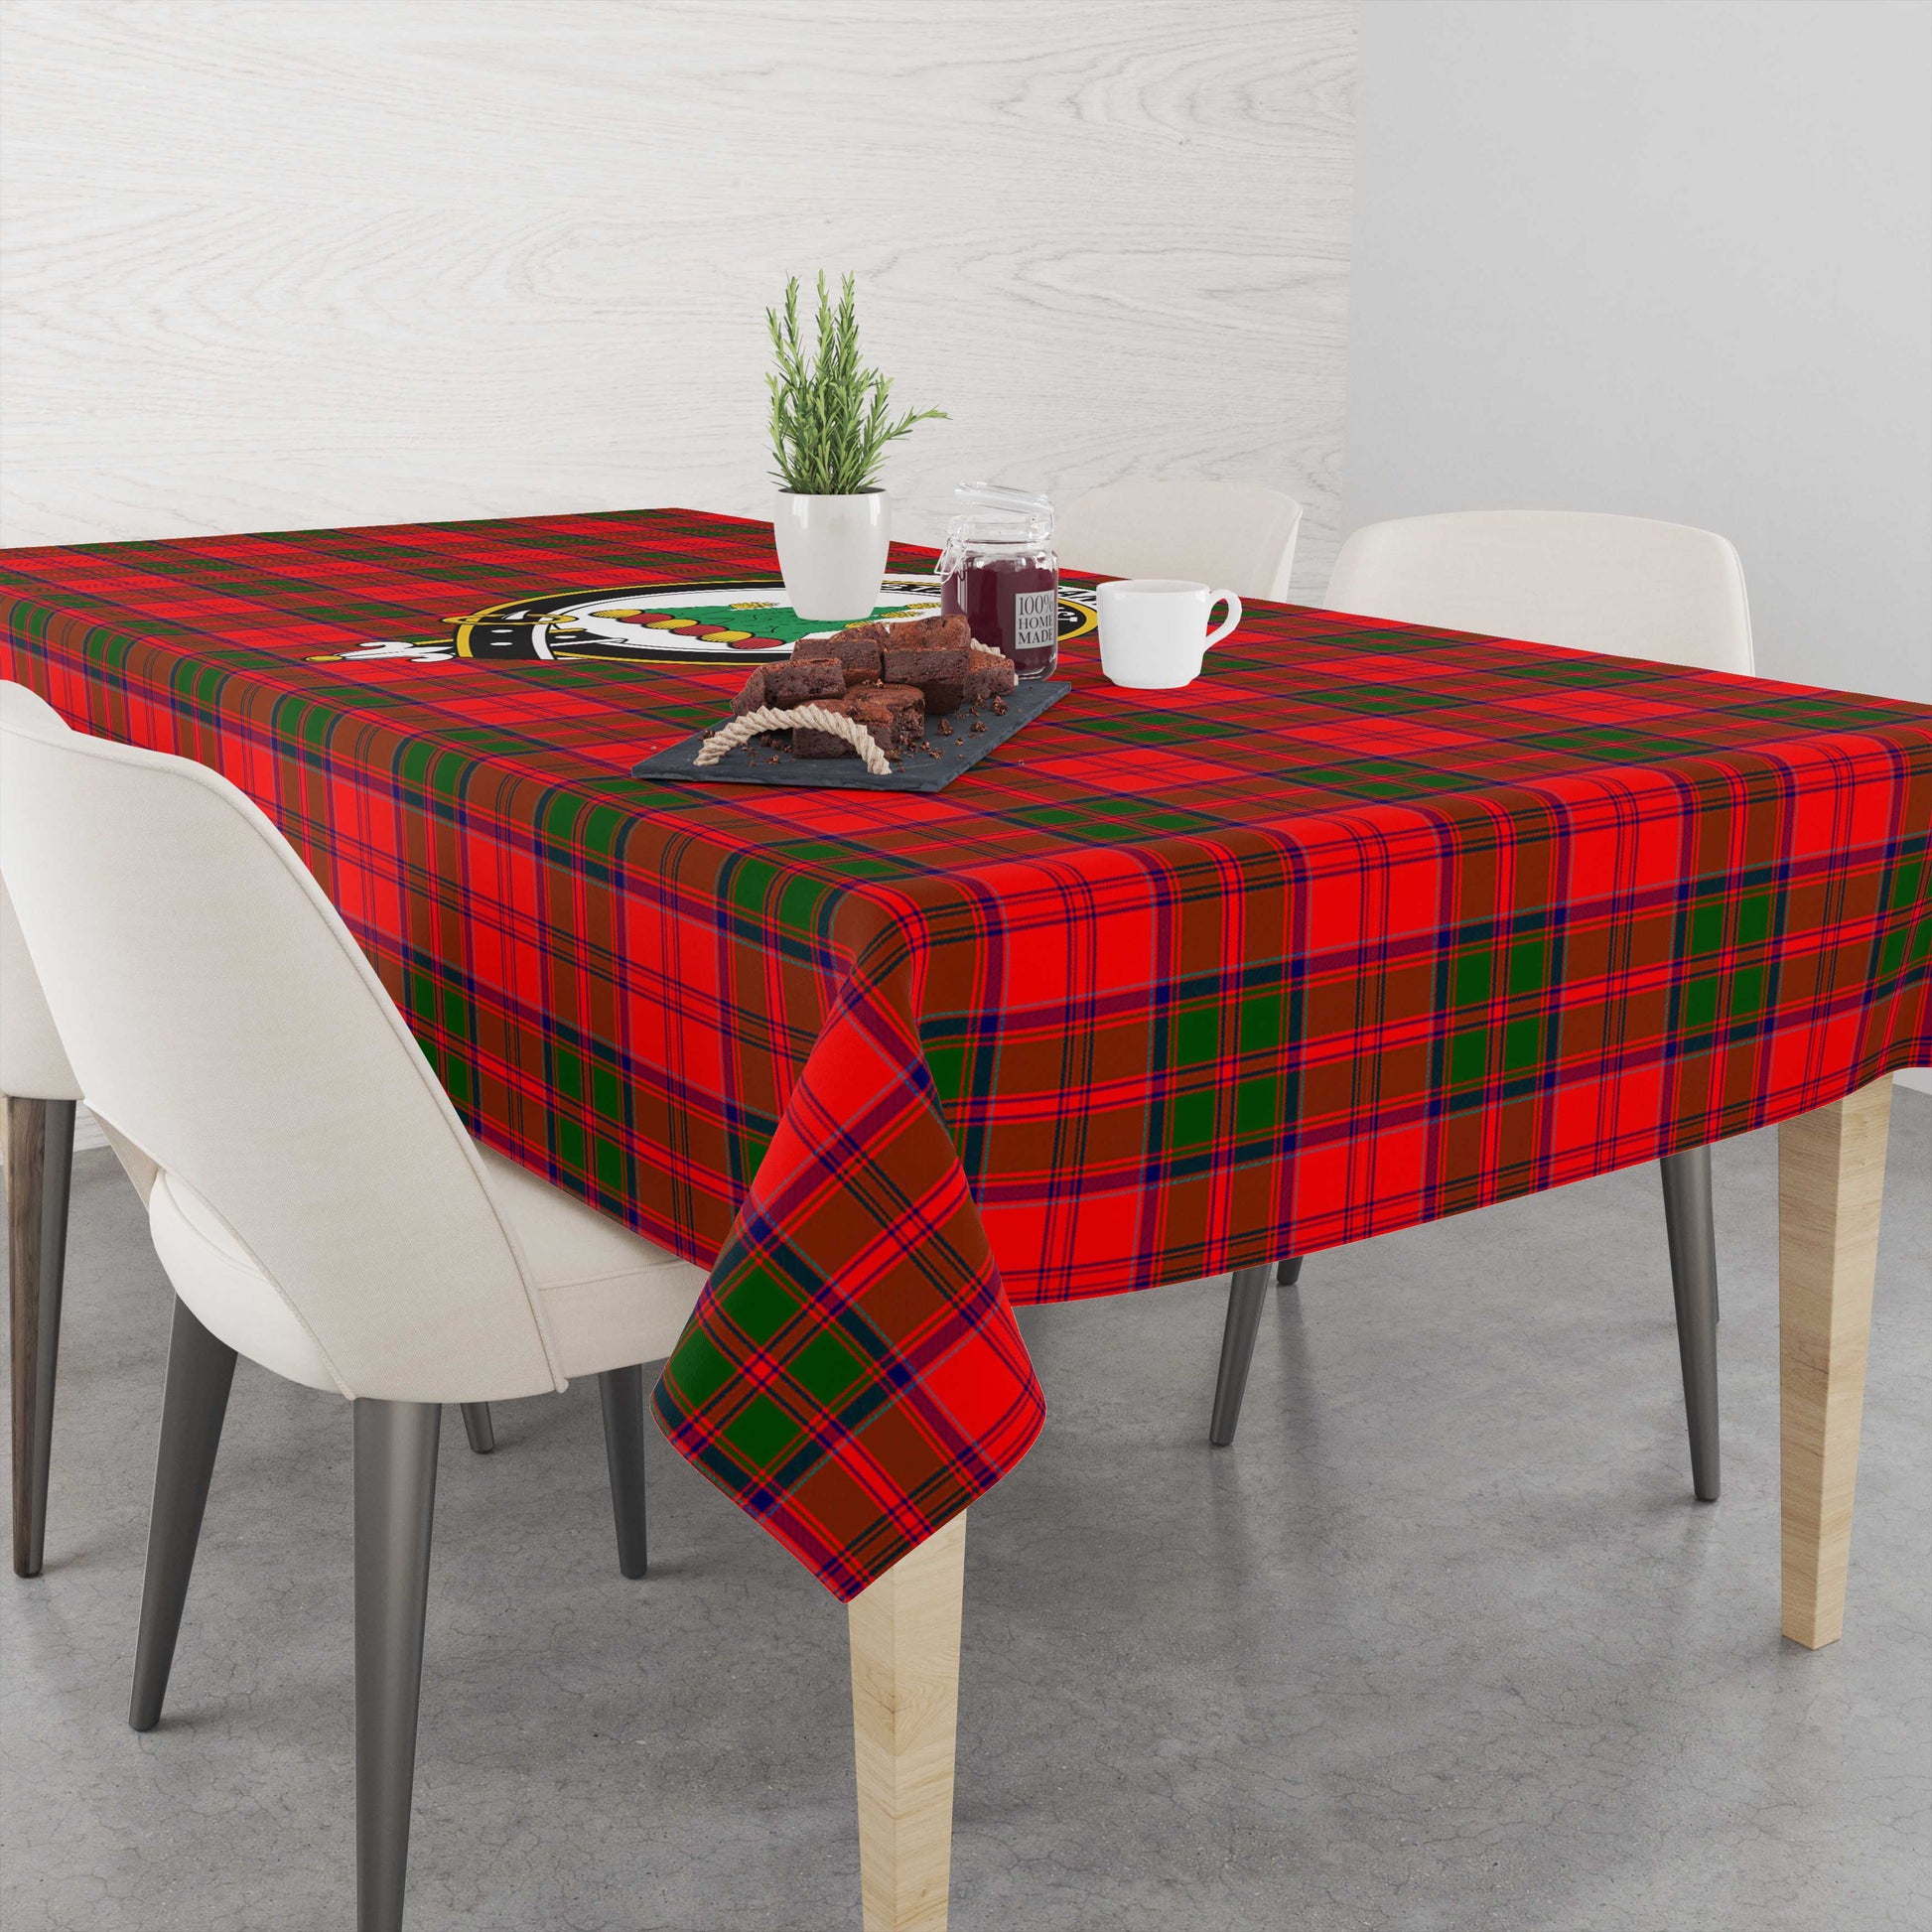 grant-modern-tatan-tablecloth-with-family-crest